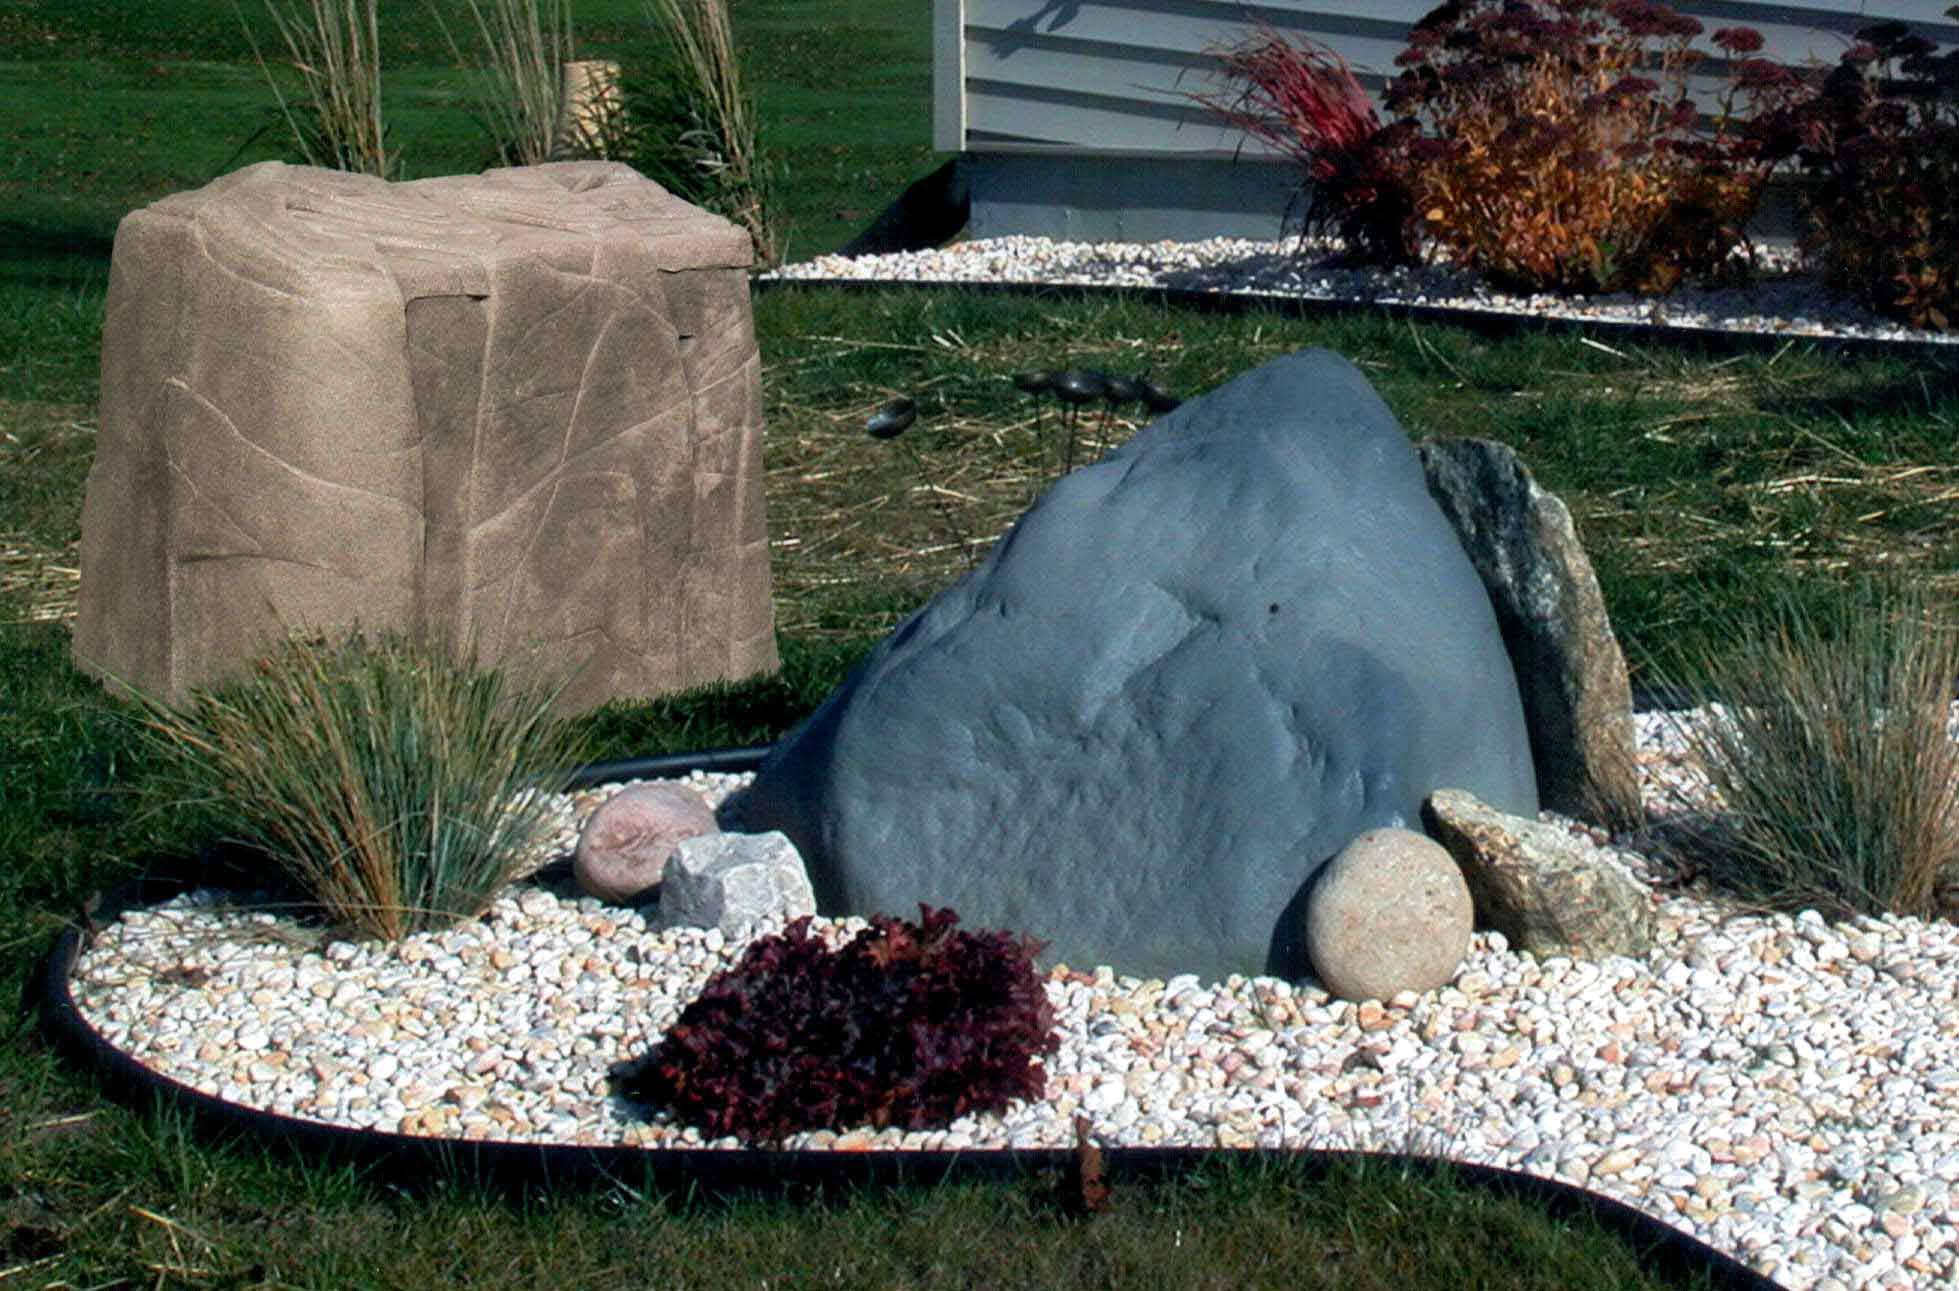 Landscape Rocks hide unsightly pipes and vents., Topp Industries, Inc.